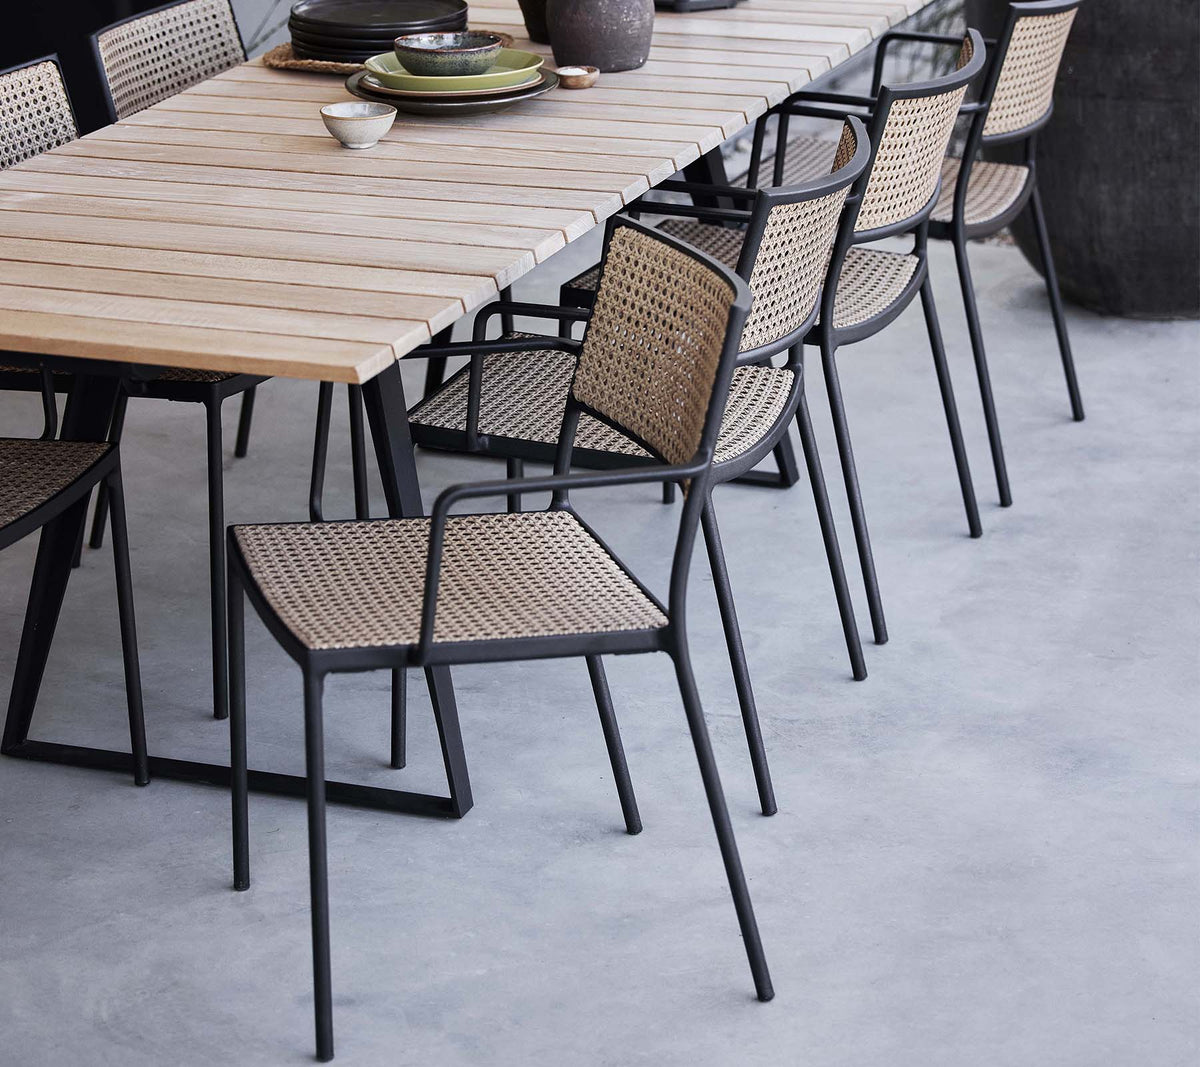 Create a modern and elegant outdoor space with the Vibe dining